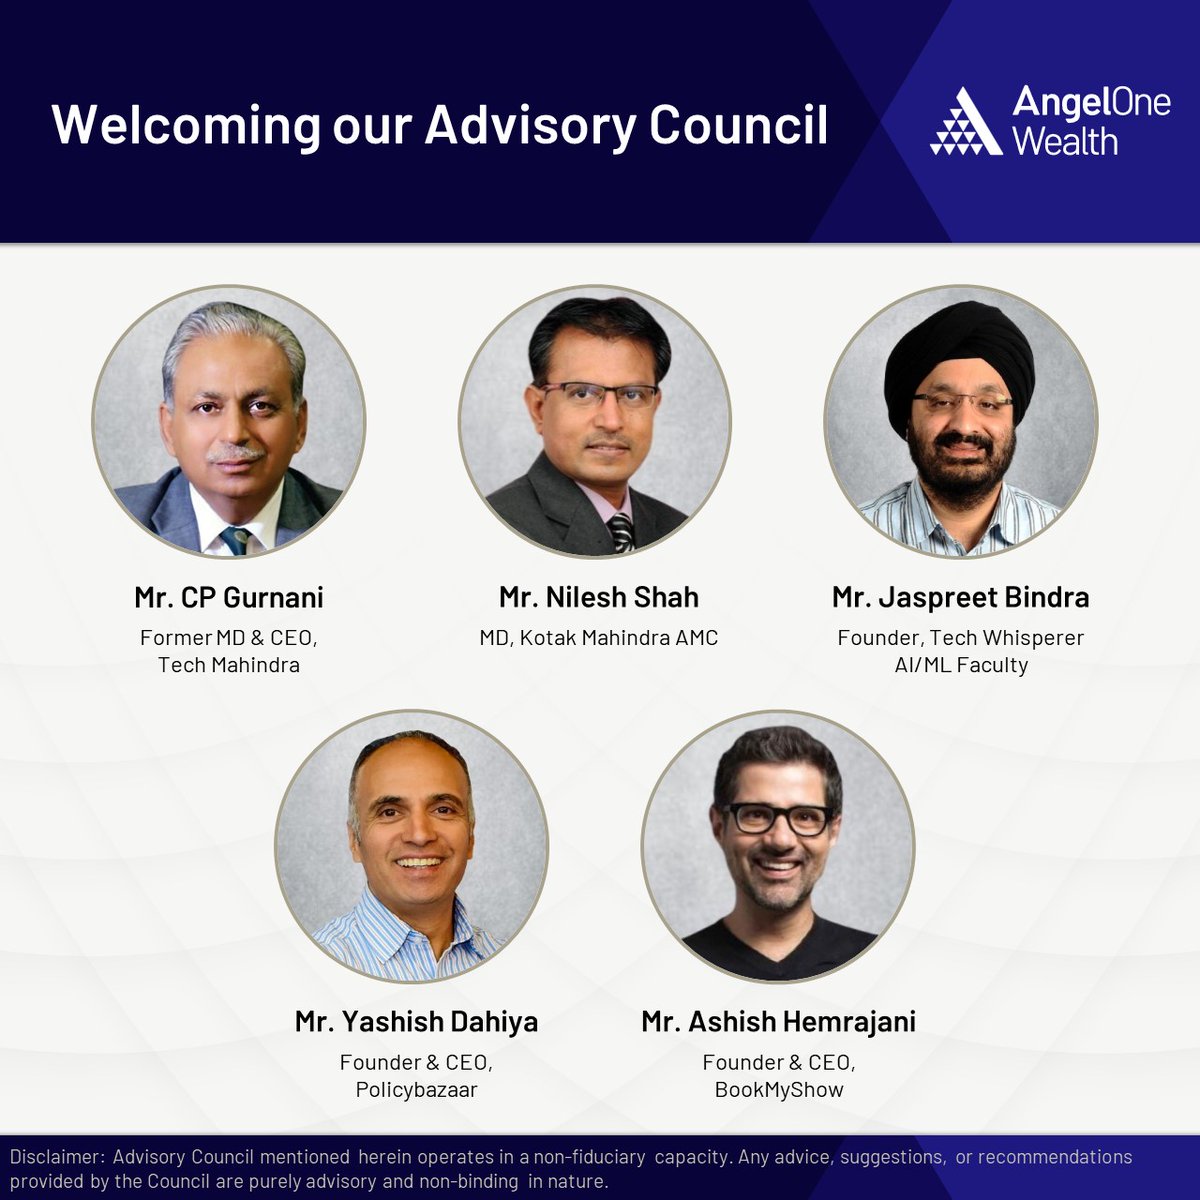 We are just in month 2 of building @AngelOneWealth, but this is personally big - We have completed a key milestone of forming our Advisory Council. 

Excited to have some amazing business and Tech leaders guiding us on this journey to build a high quality Wealthtech platform.